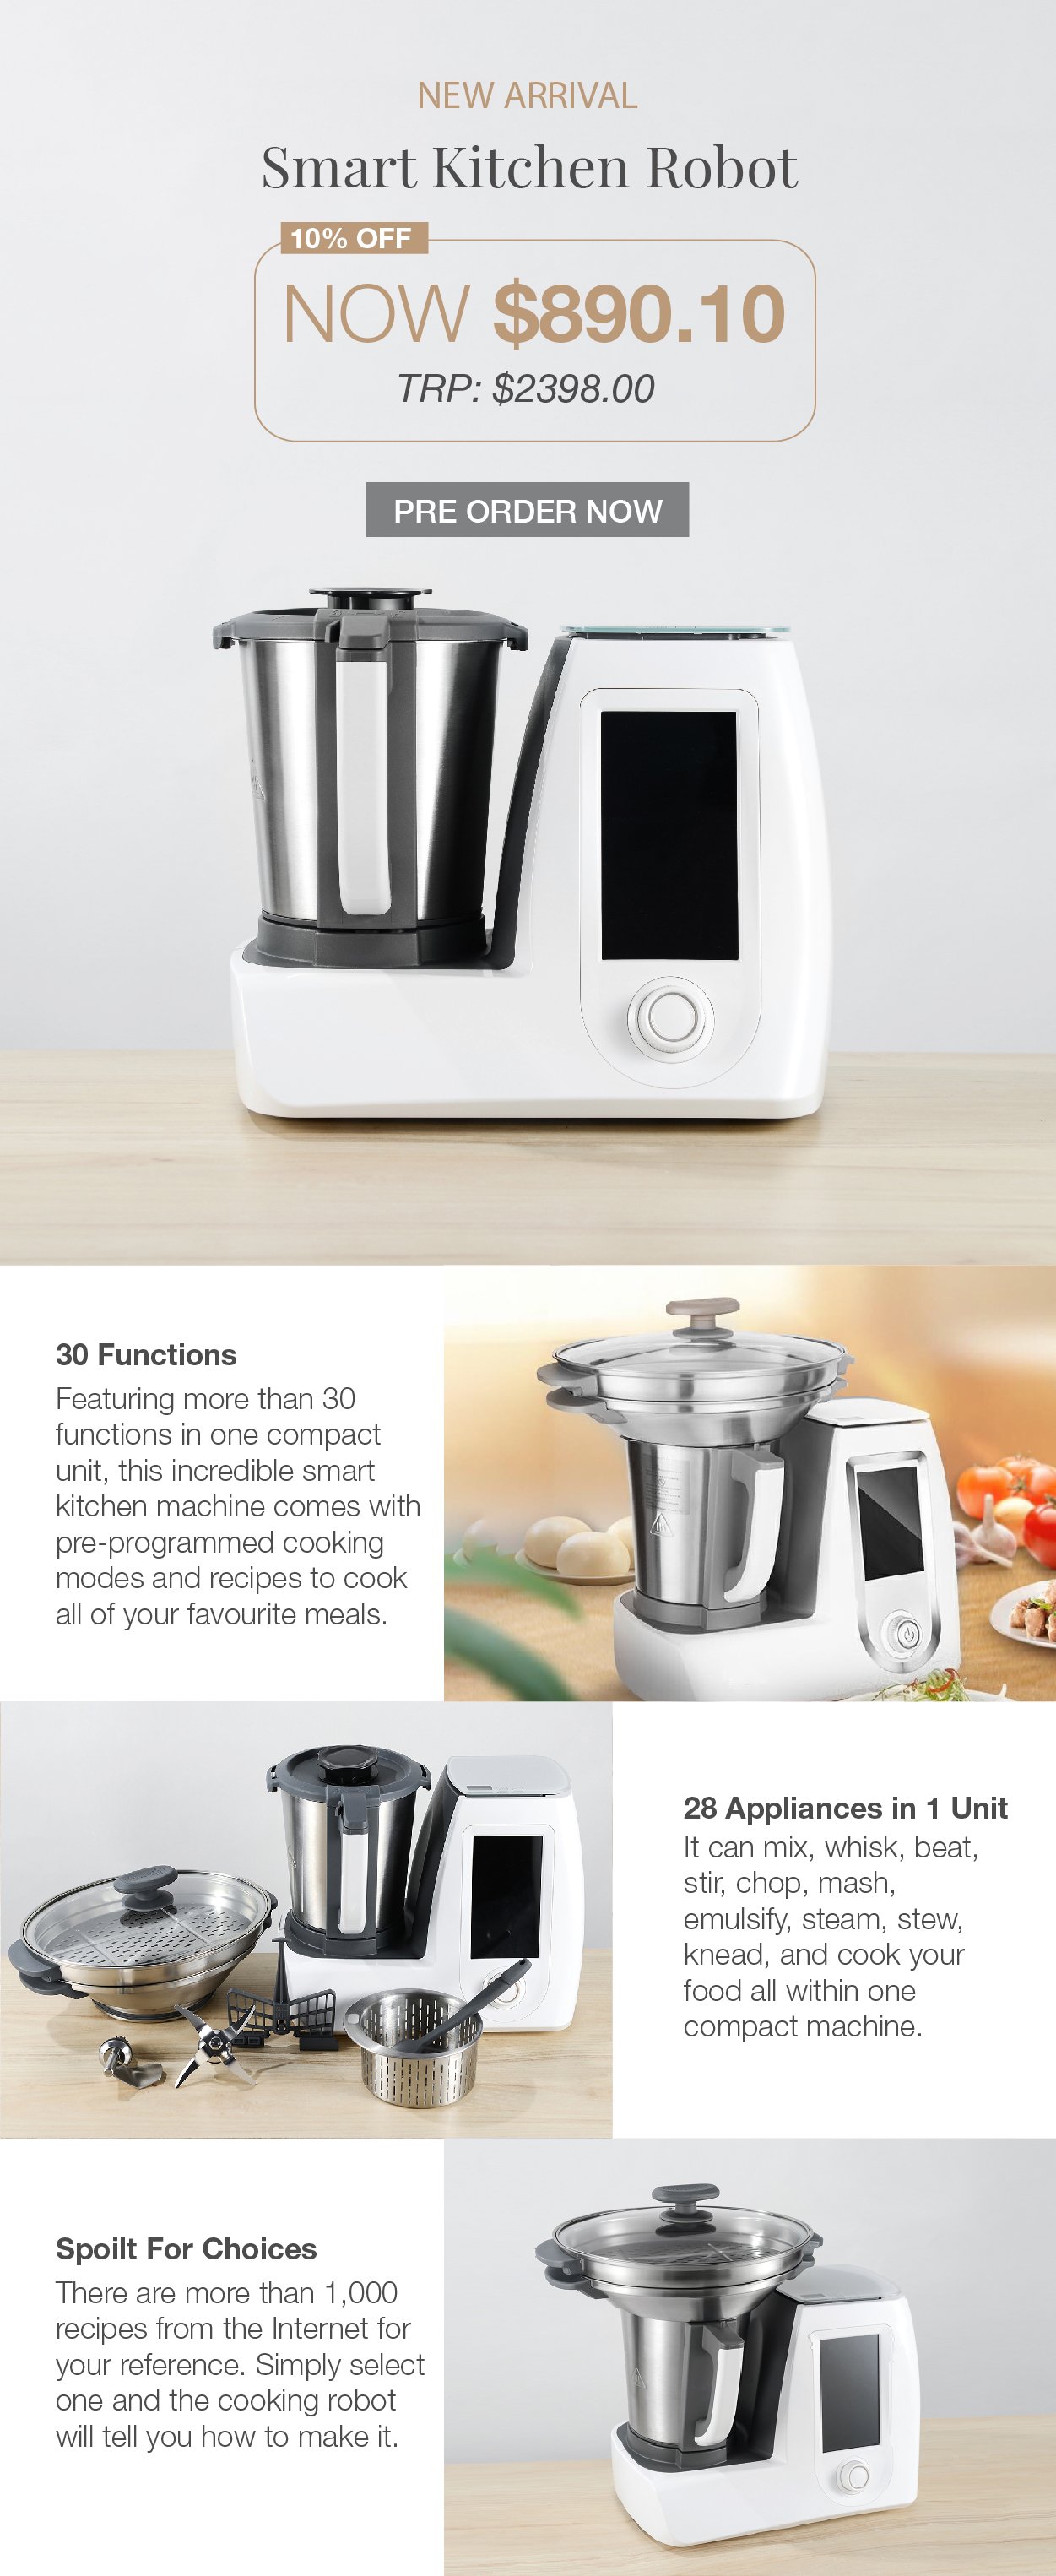 Pre-order your Cooking Robot